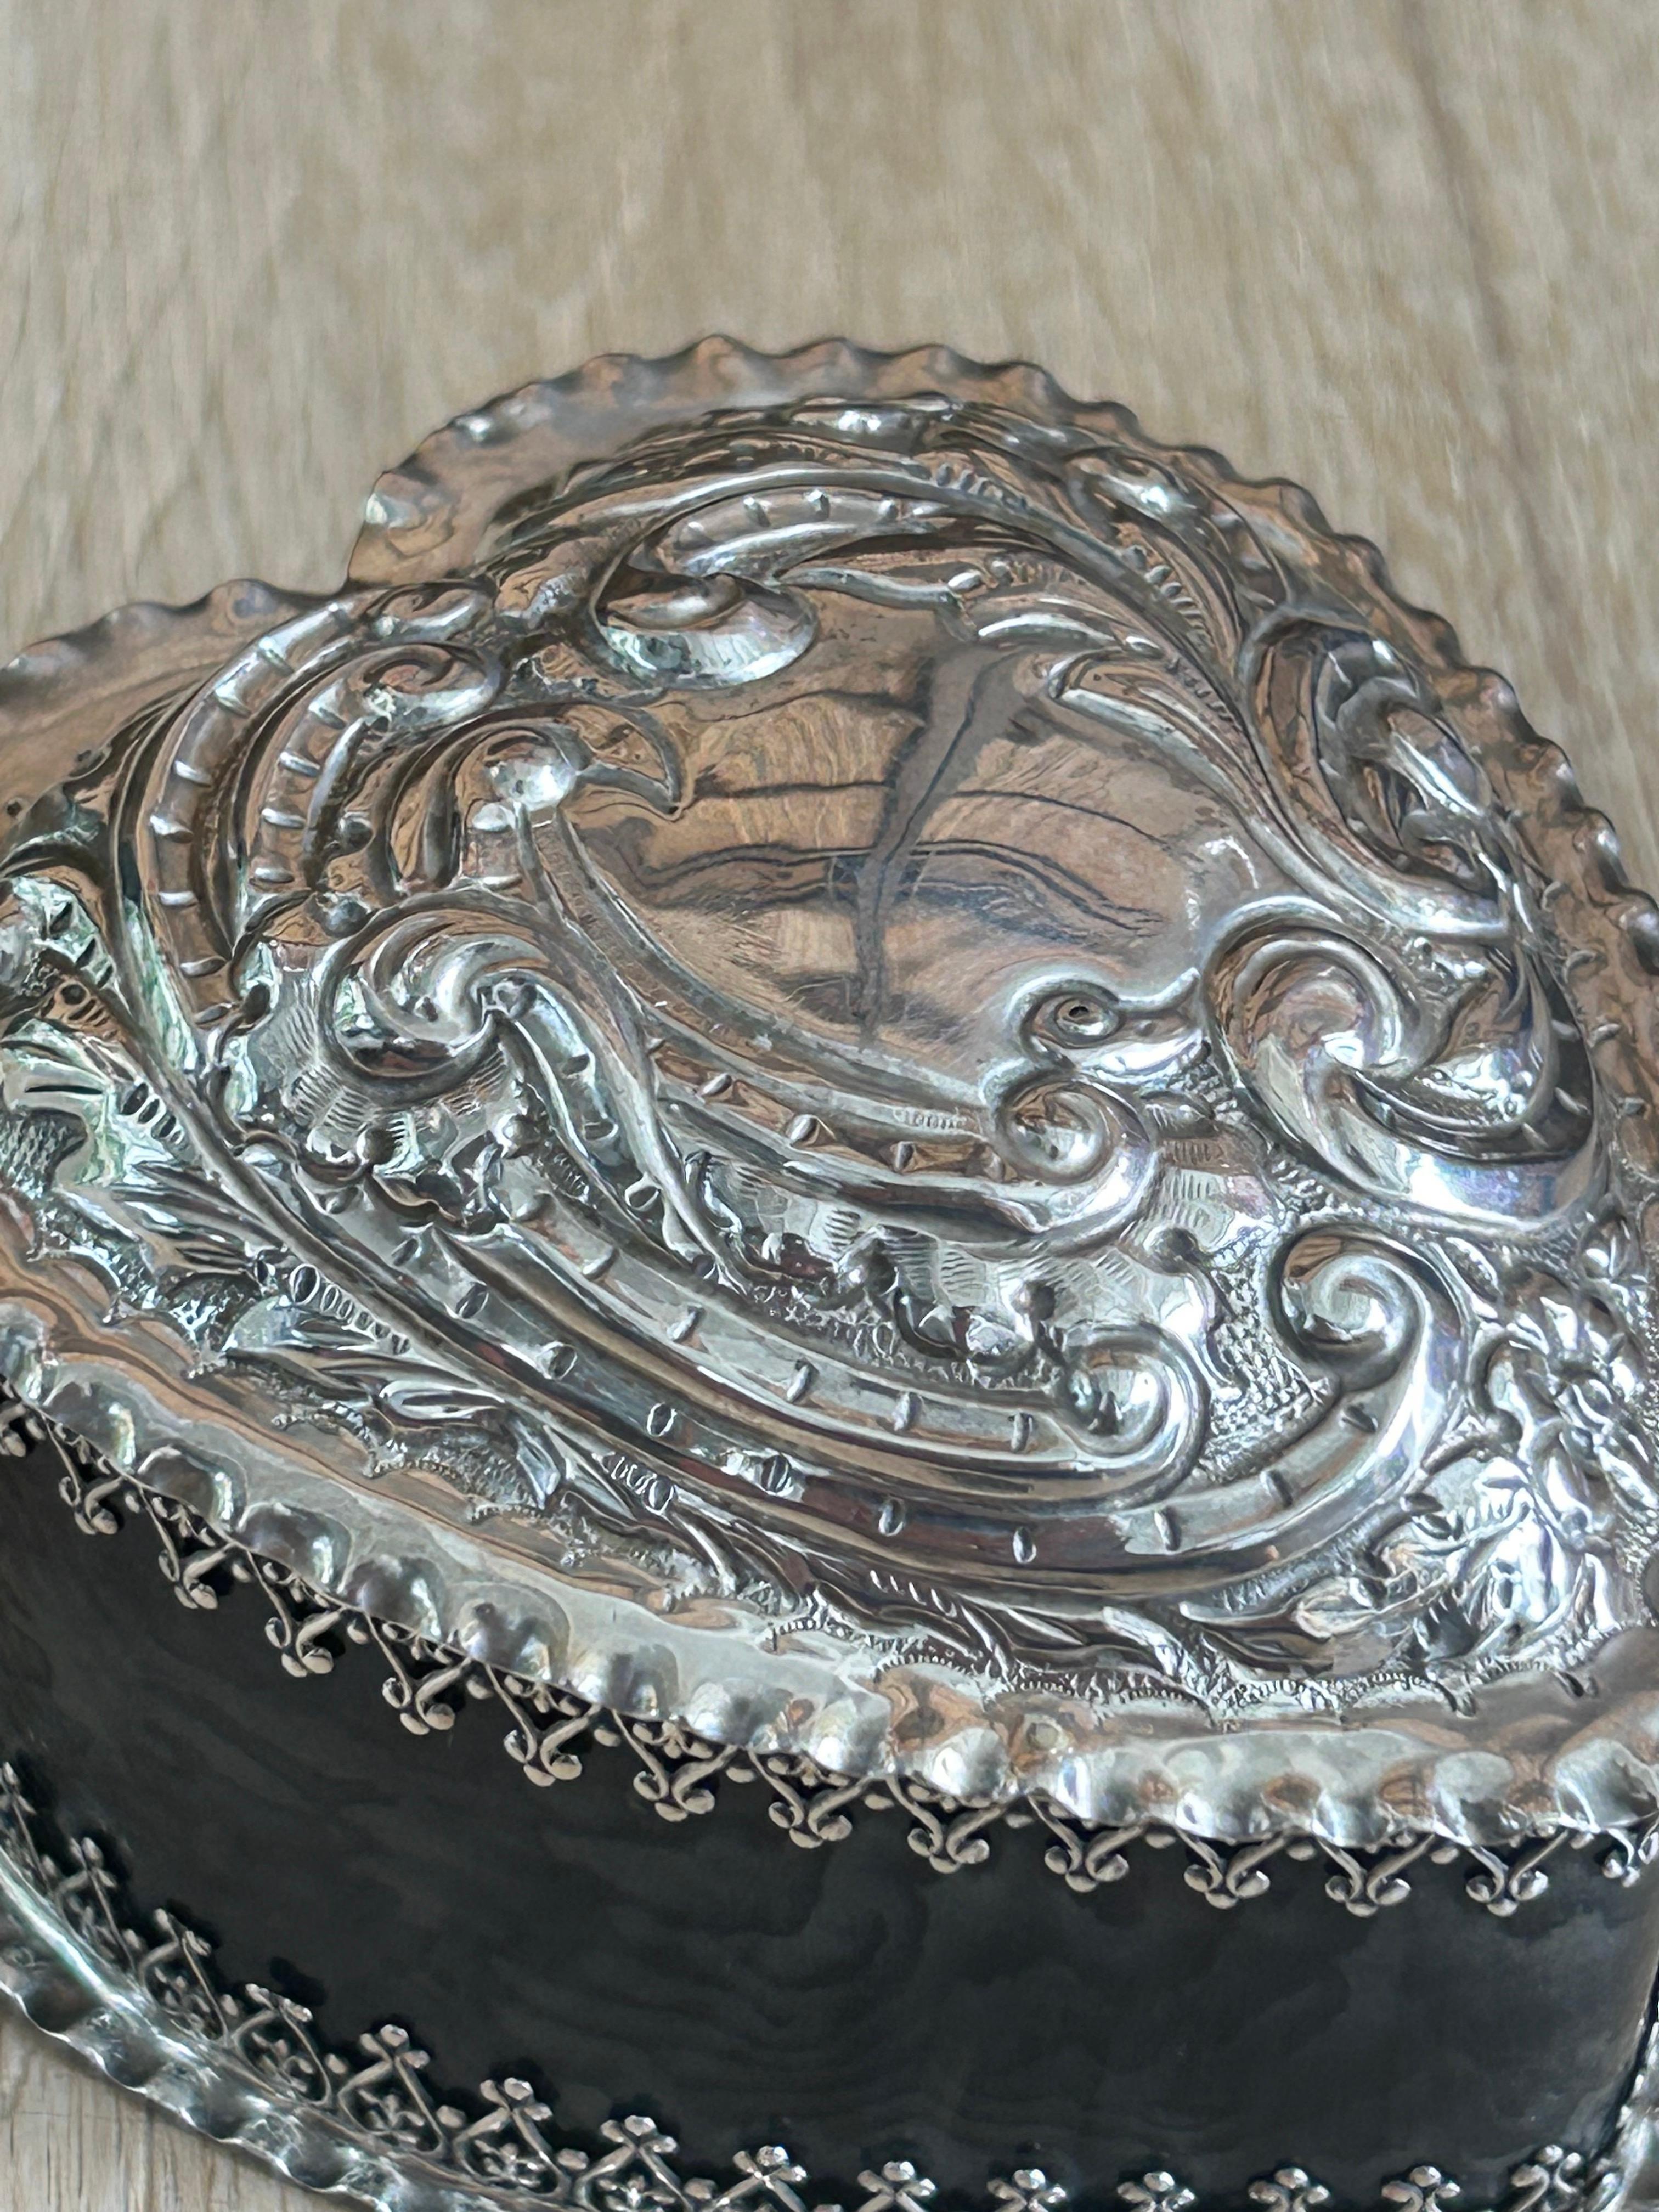 Silver and Tortoiseshell jewellery box in the shape of a heart with floral decoration on the lid, silver laces linking the silver parts to the tortoiseshell sides.

The pictures are part of the description.

Warning: Since this items are made of a